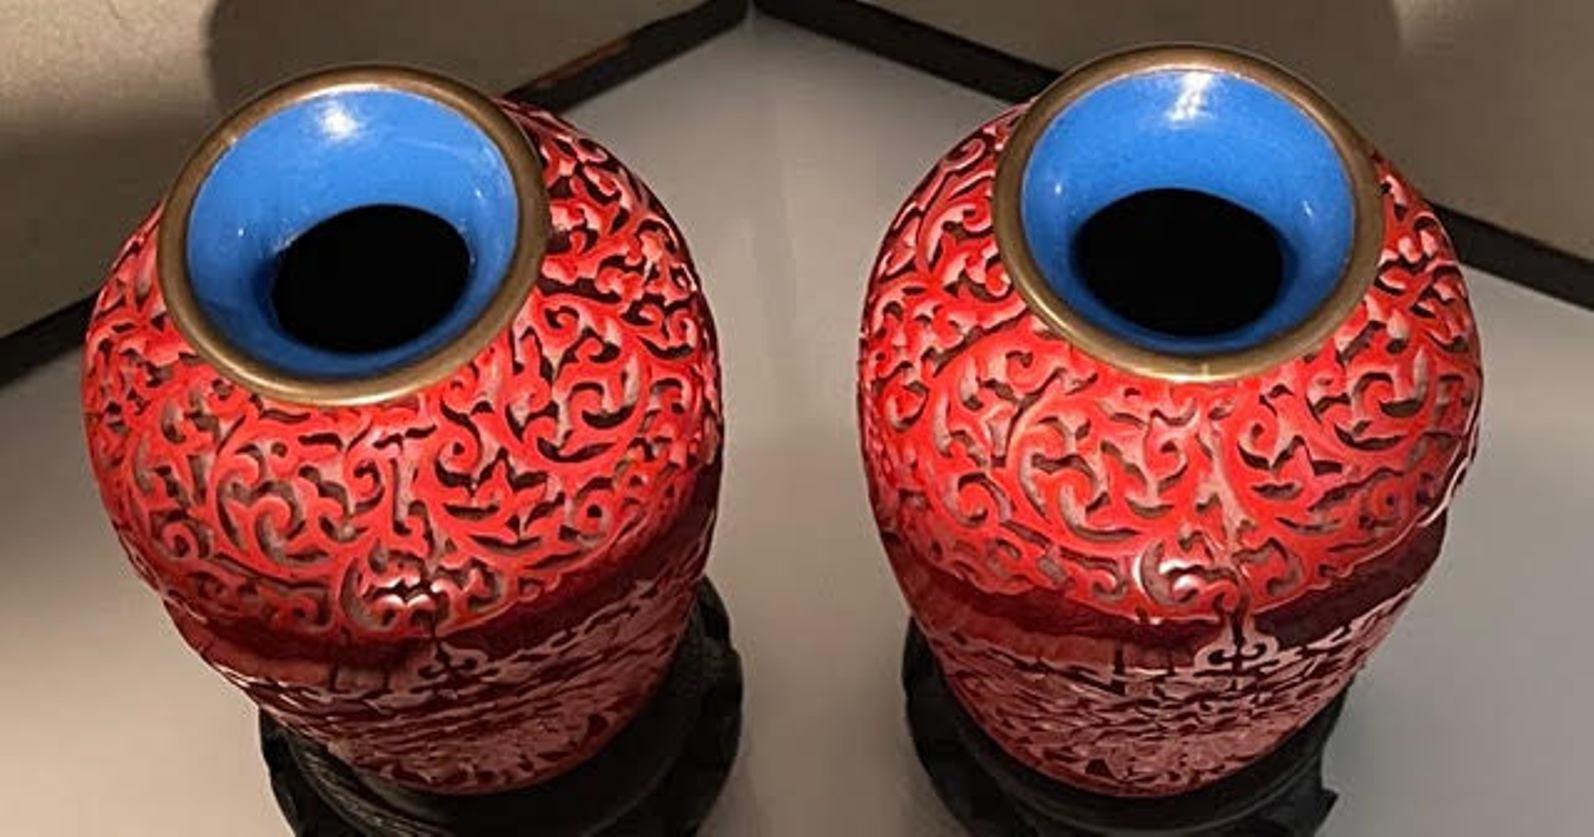 Beautiful pair of Chinese cinnabar vases with elaborate carving on the exterior and a blue accented interior. Includes vase stands.